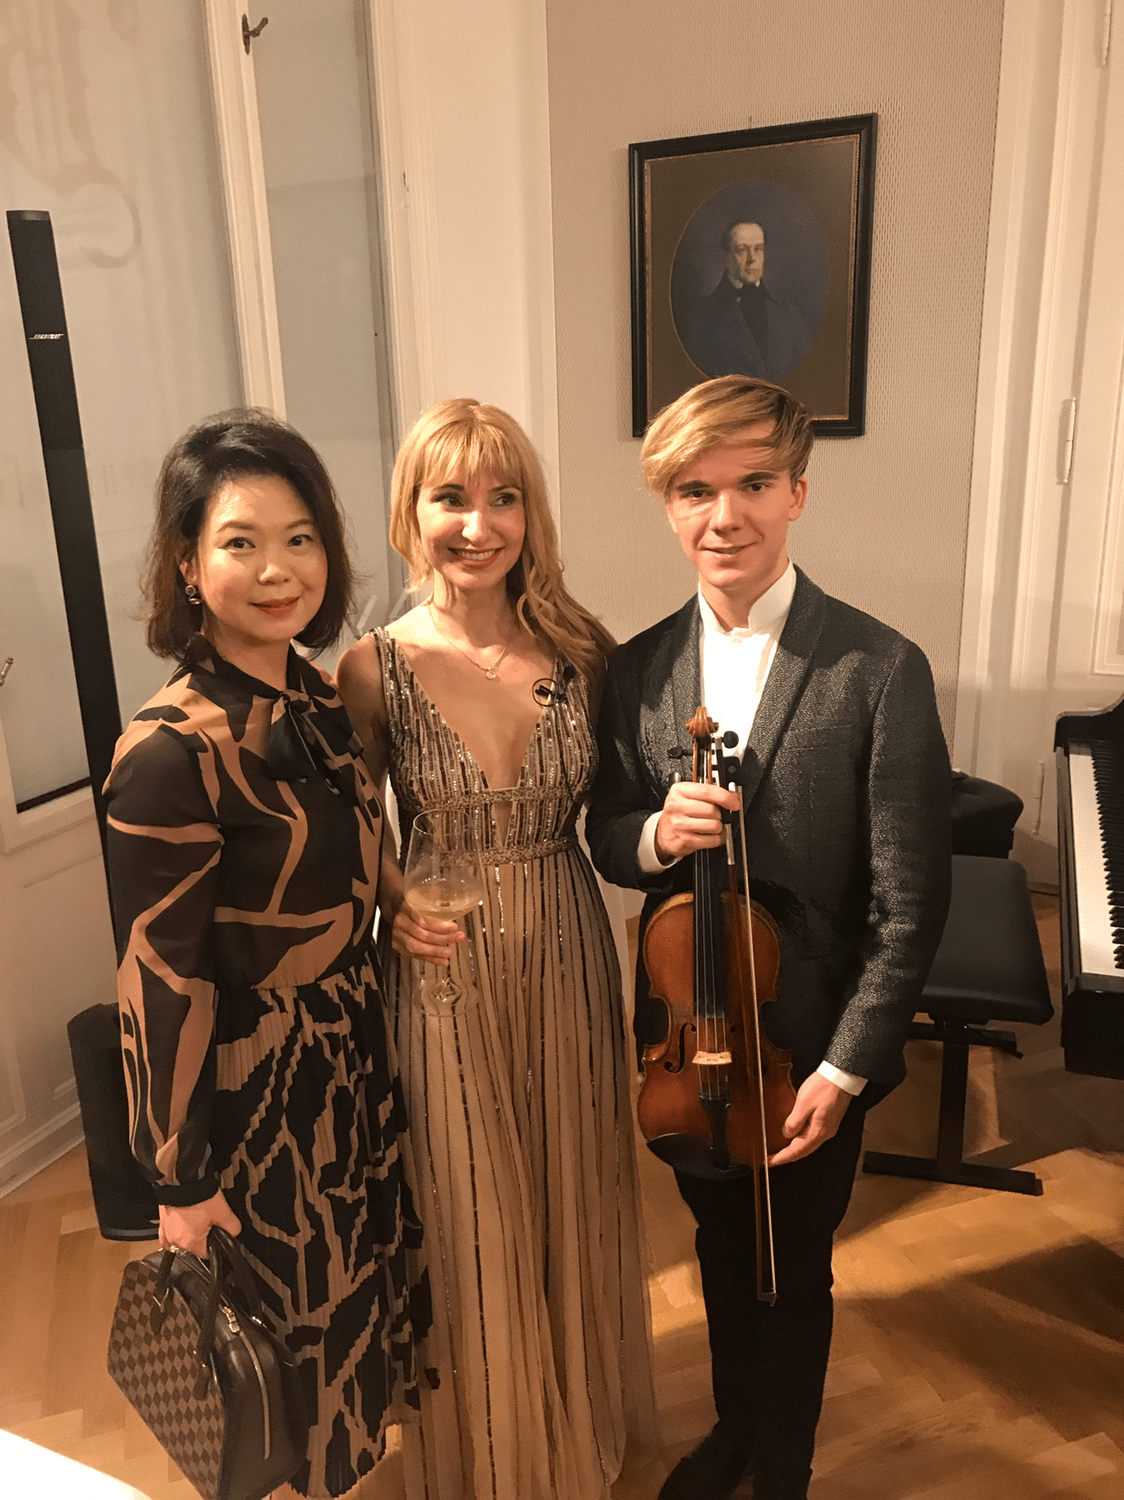 Karen Goh, Donka Angatscheva and Yury Revich, who played with an Antonio Stradivari (1709) from the Goh Family Instrument Collection.